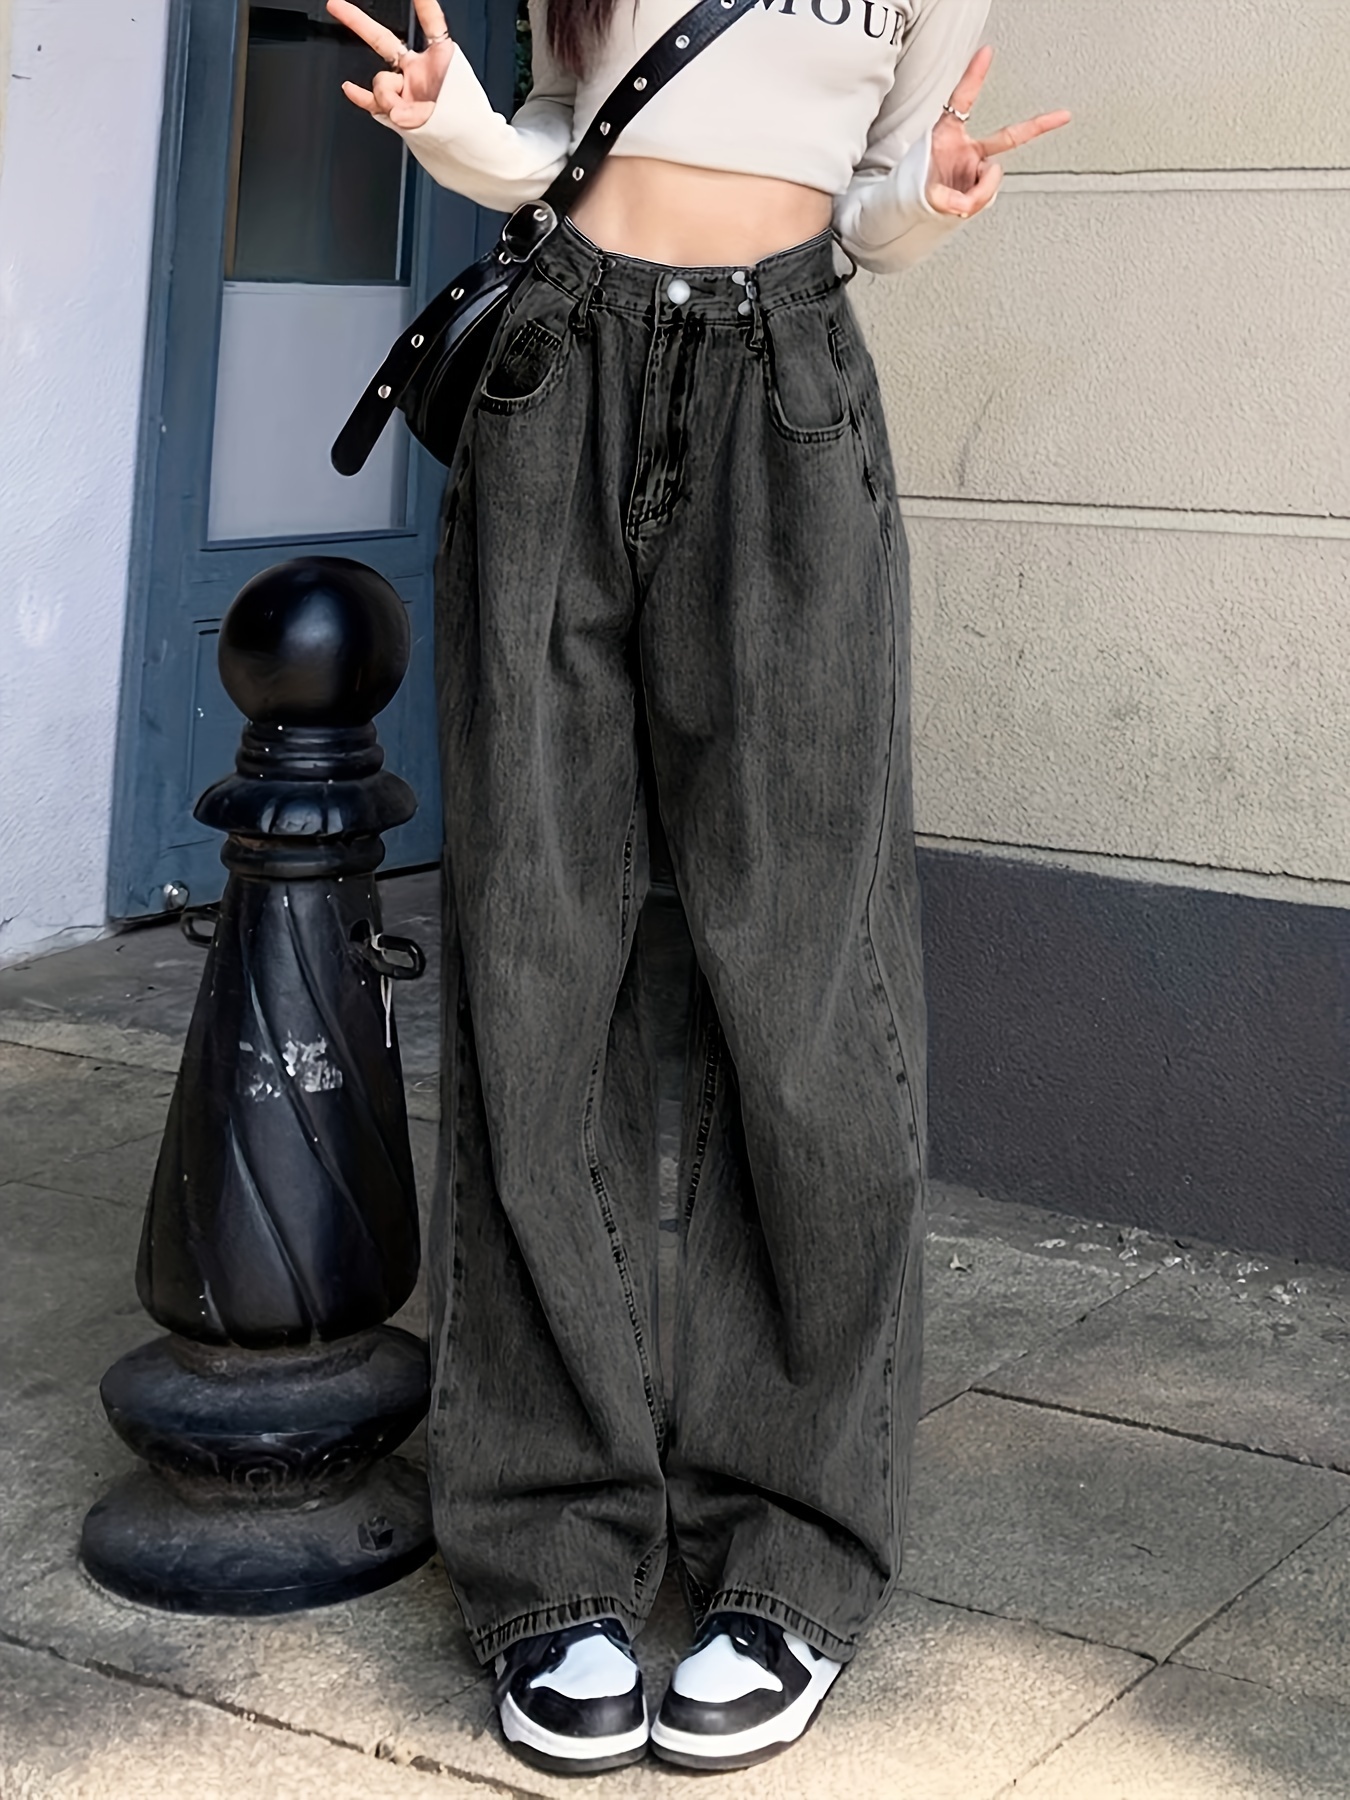 Adjustable black baggy pants, Women's Fashion, Bottoms, Other